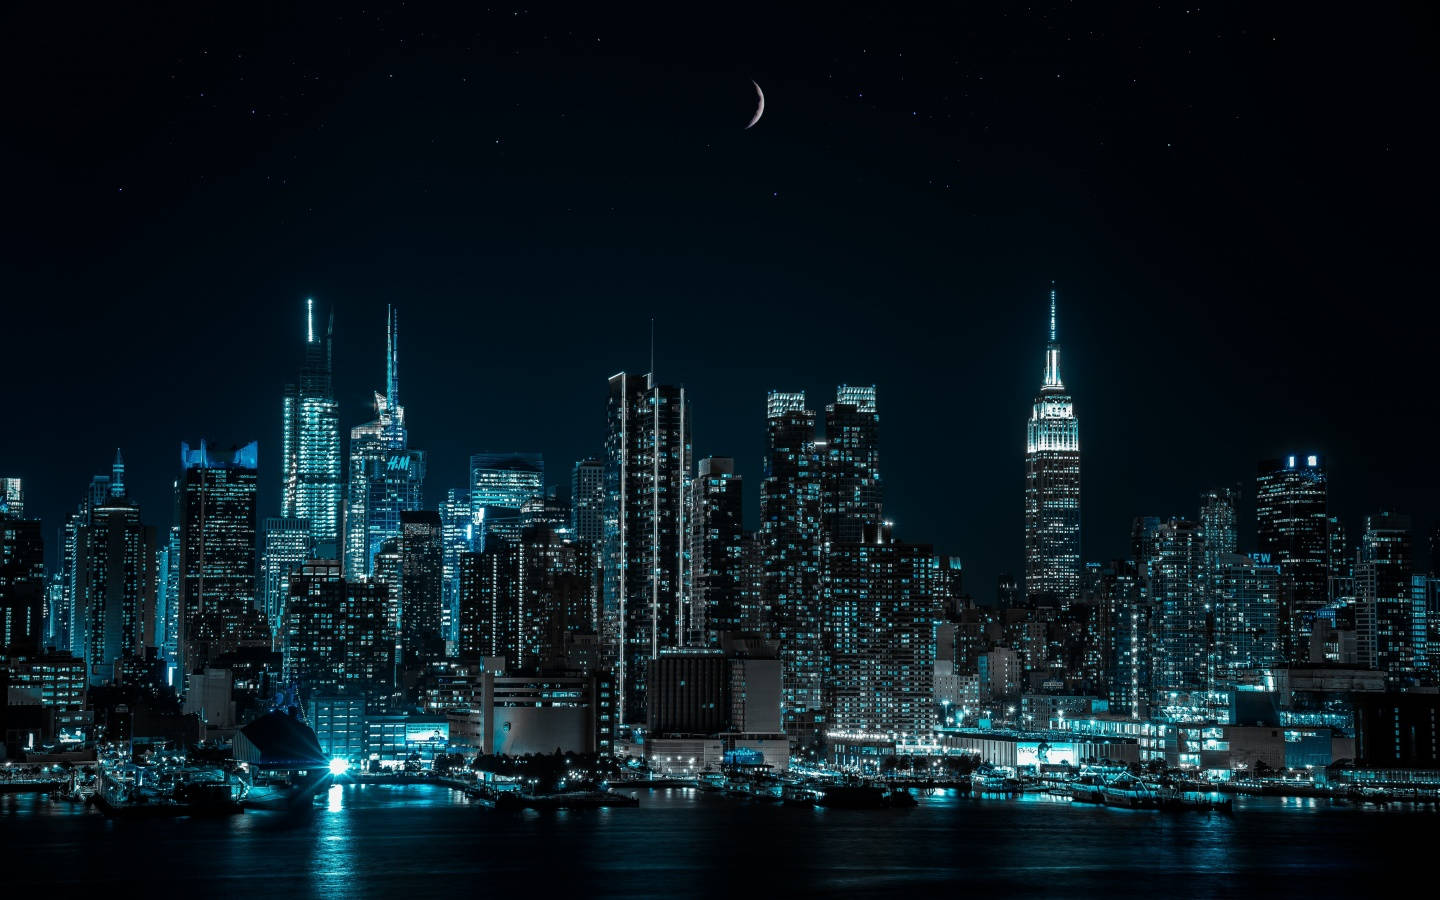 An artistic view of the urban landscape, with vibrant colors and enchanting night lights in Night City. Wallpaper